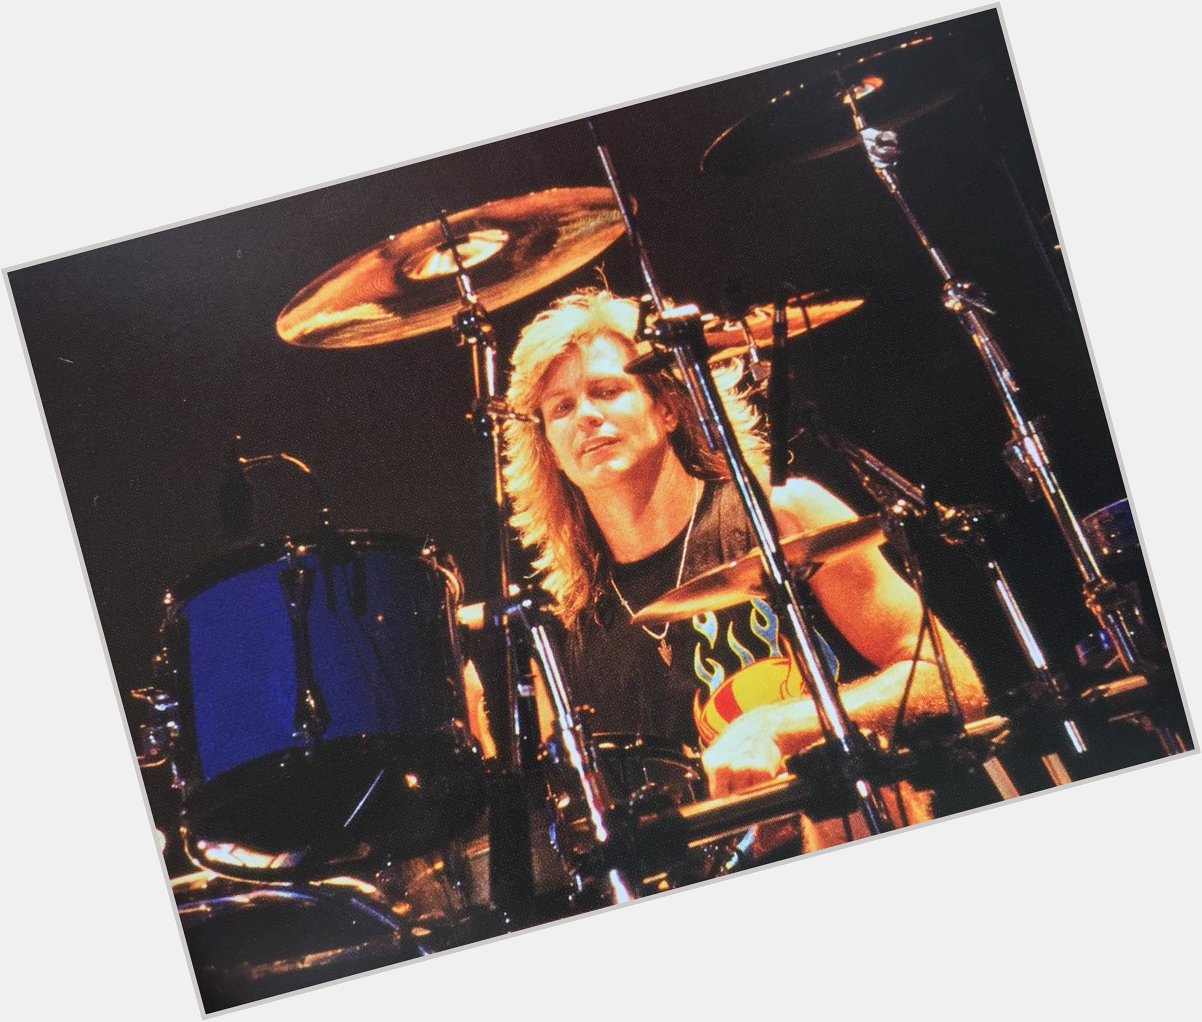 Happy Birthday Pat Torpey!
I\m always supporting you from Japan!
I hope u have a good day today! 